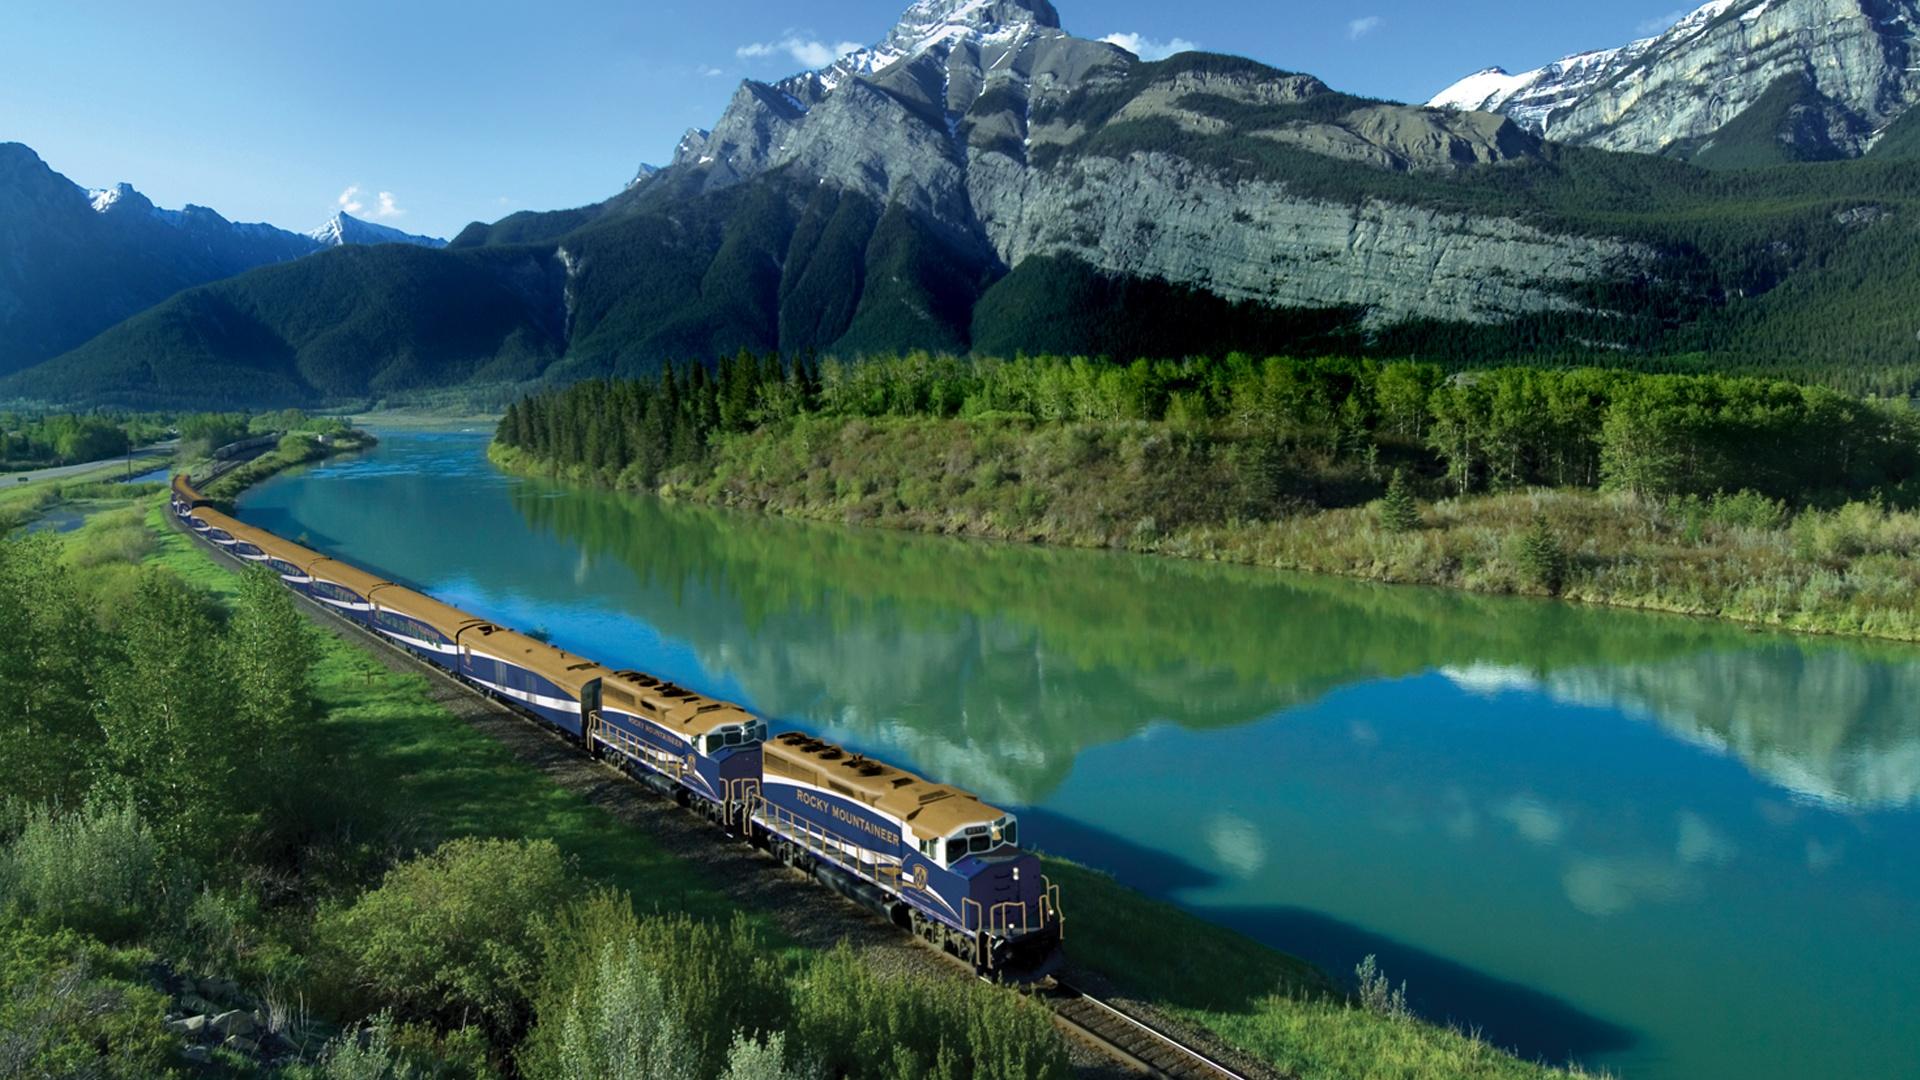 The Canadian Rockies by Rail